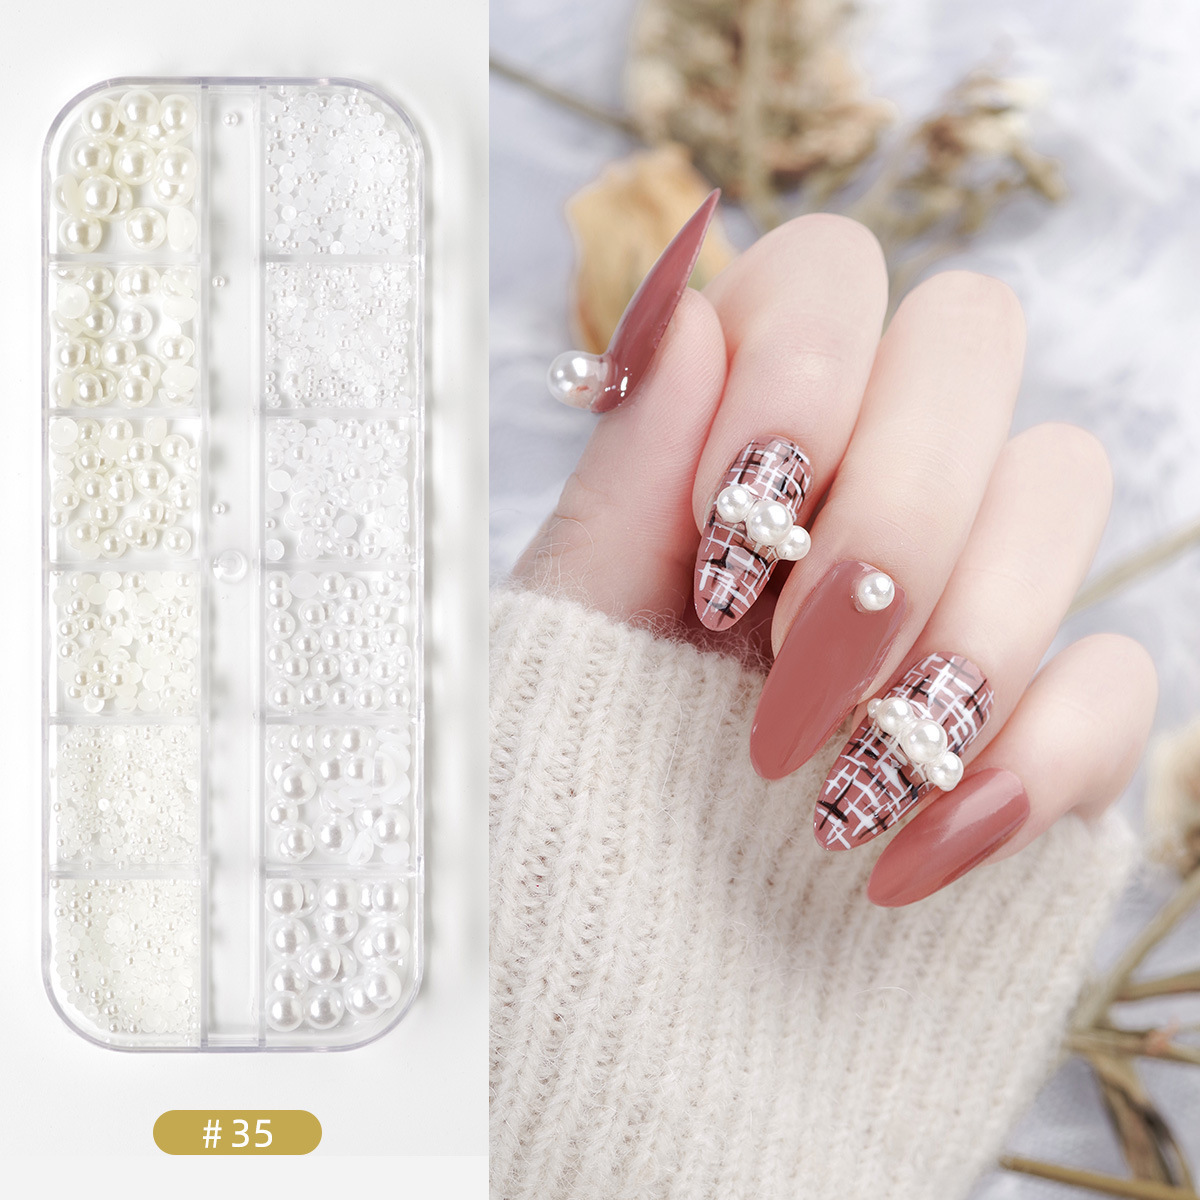 A full set of new nail art accessories,...